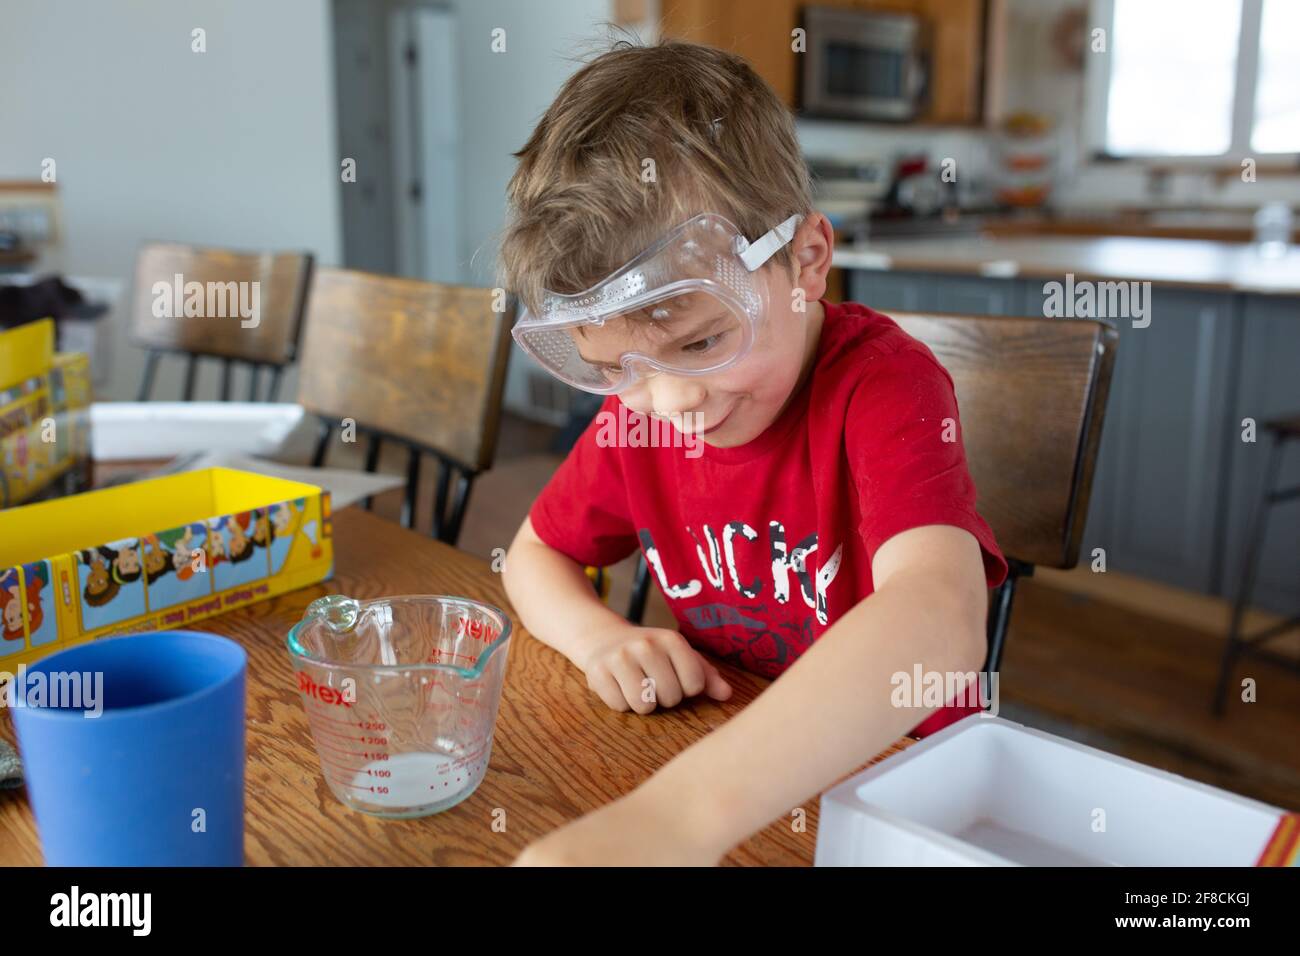 Child making funny face while conducting science experiment Stock Photo